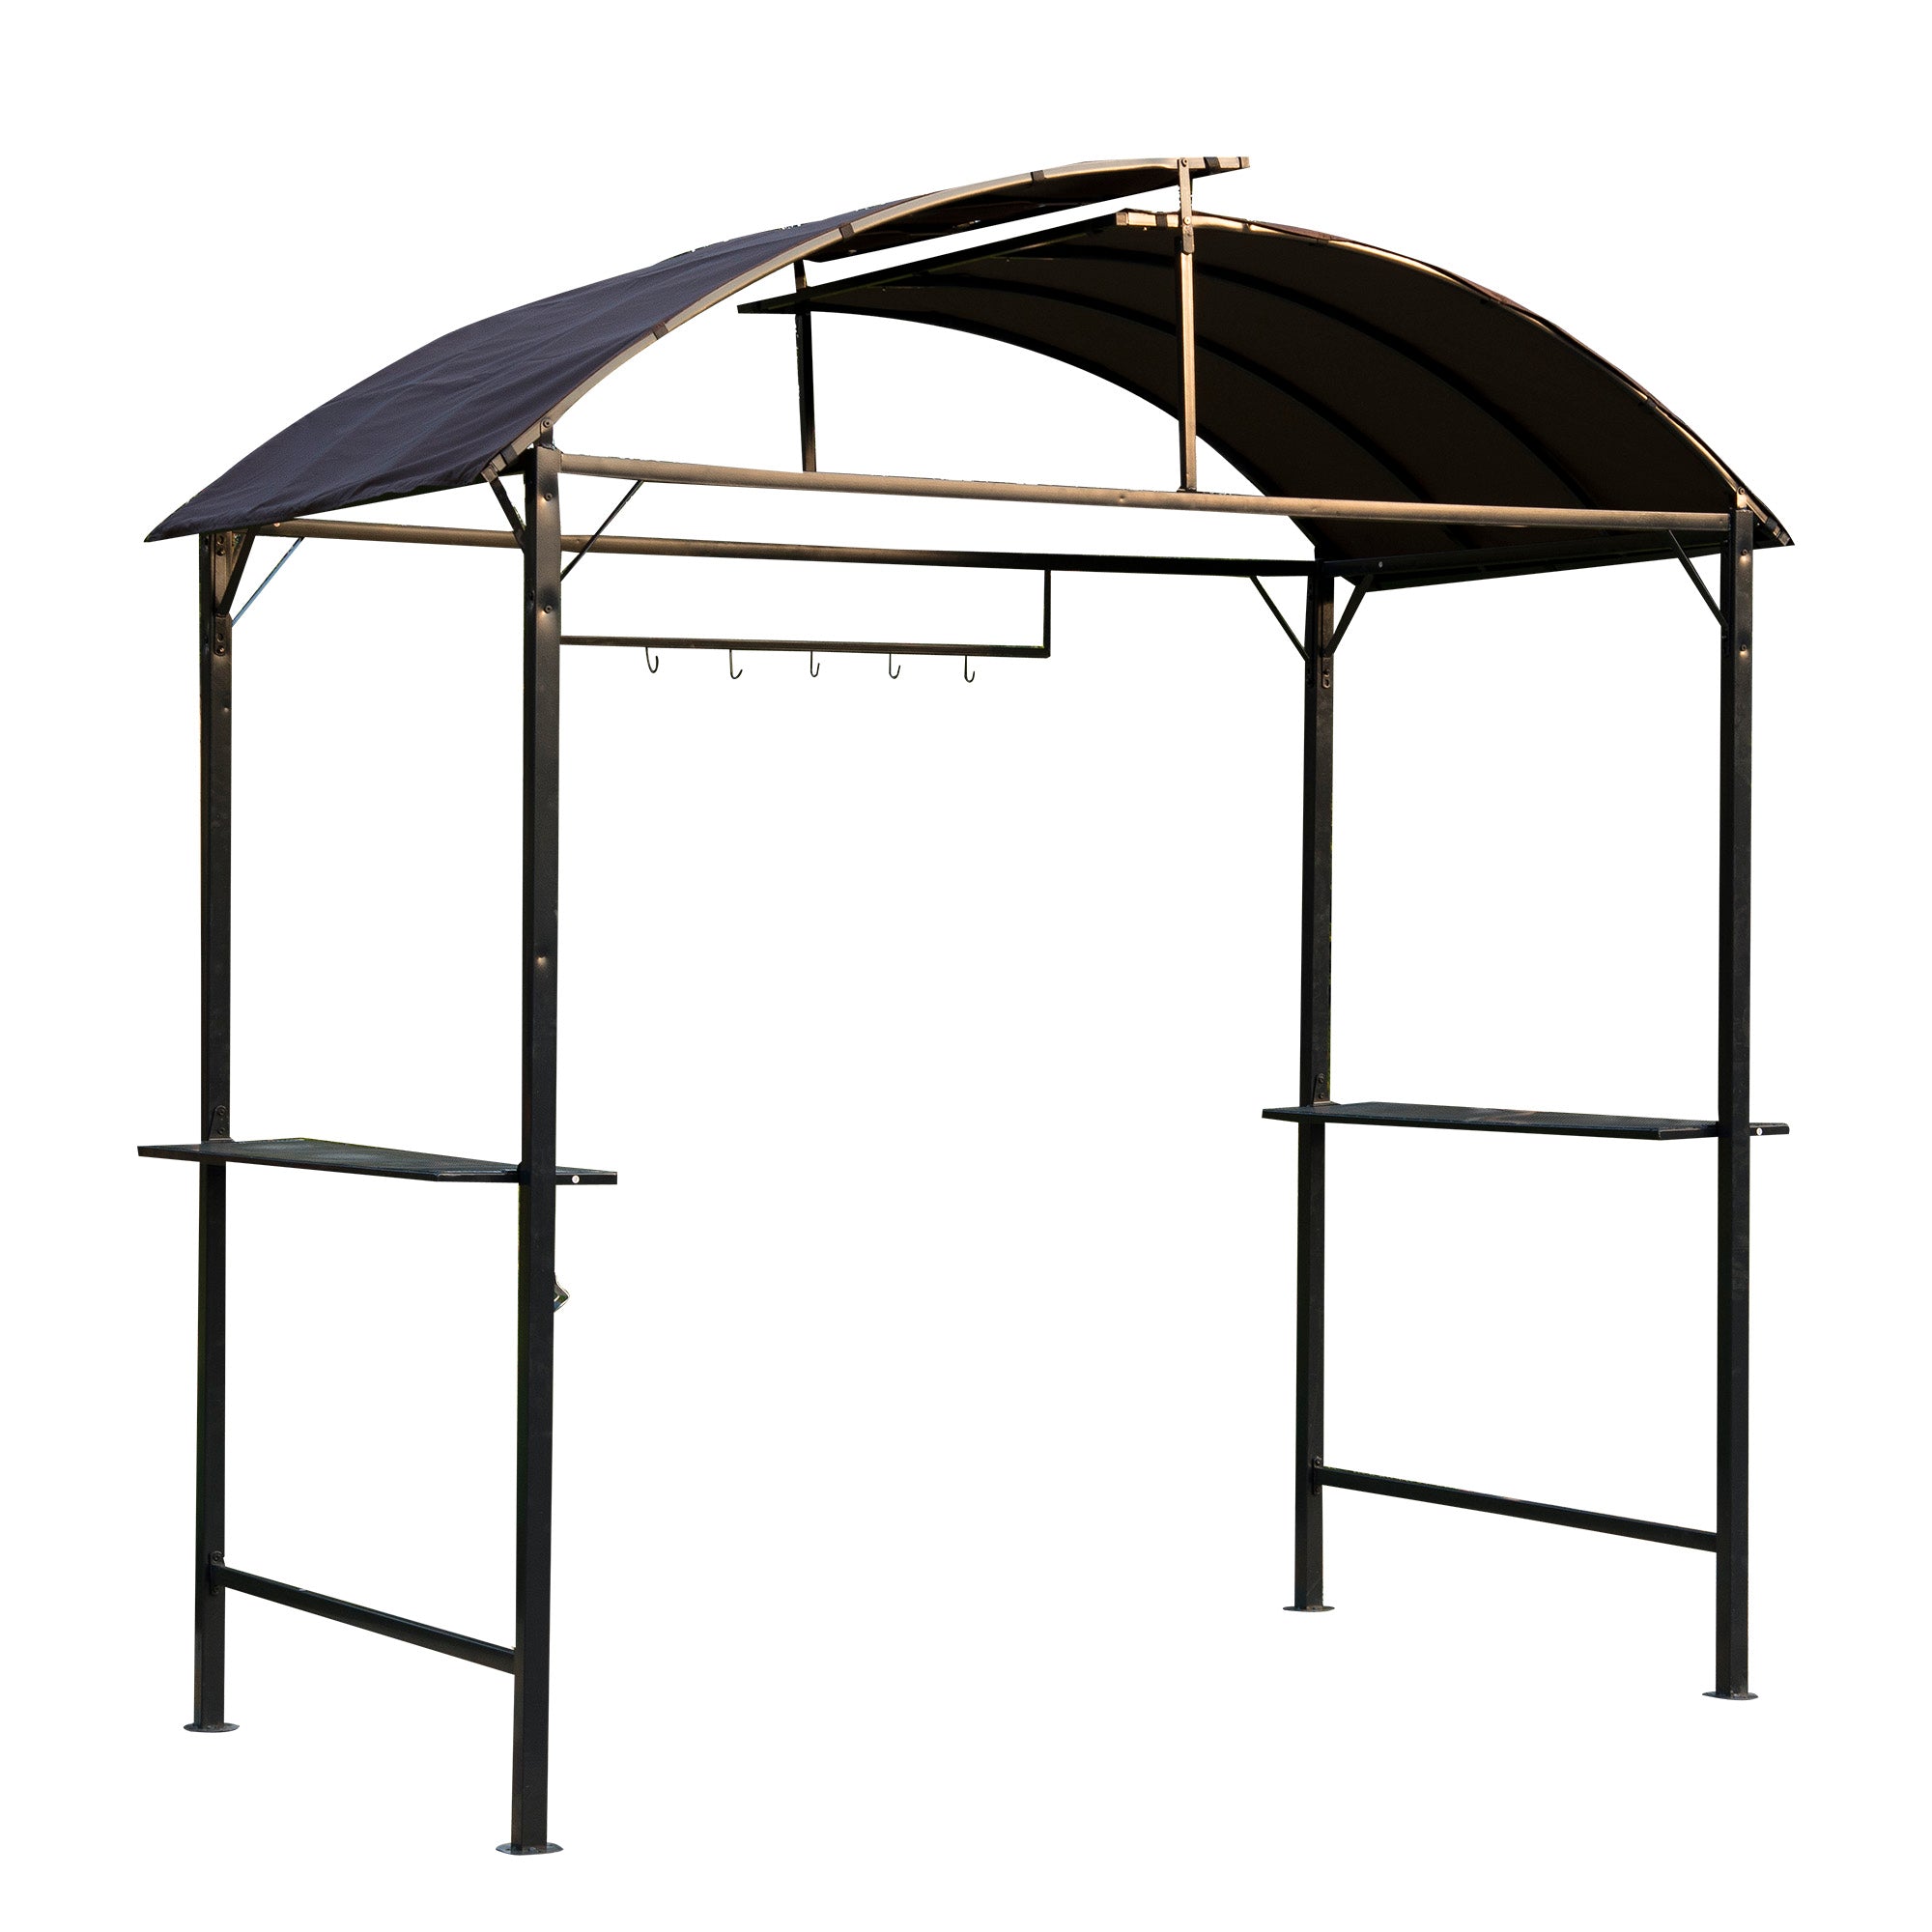 Outsunny Gazebo Marquee Canopy Awning Shelter Garden Patio BBQ Tent Grill Black